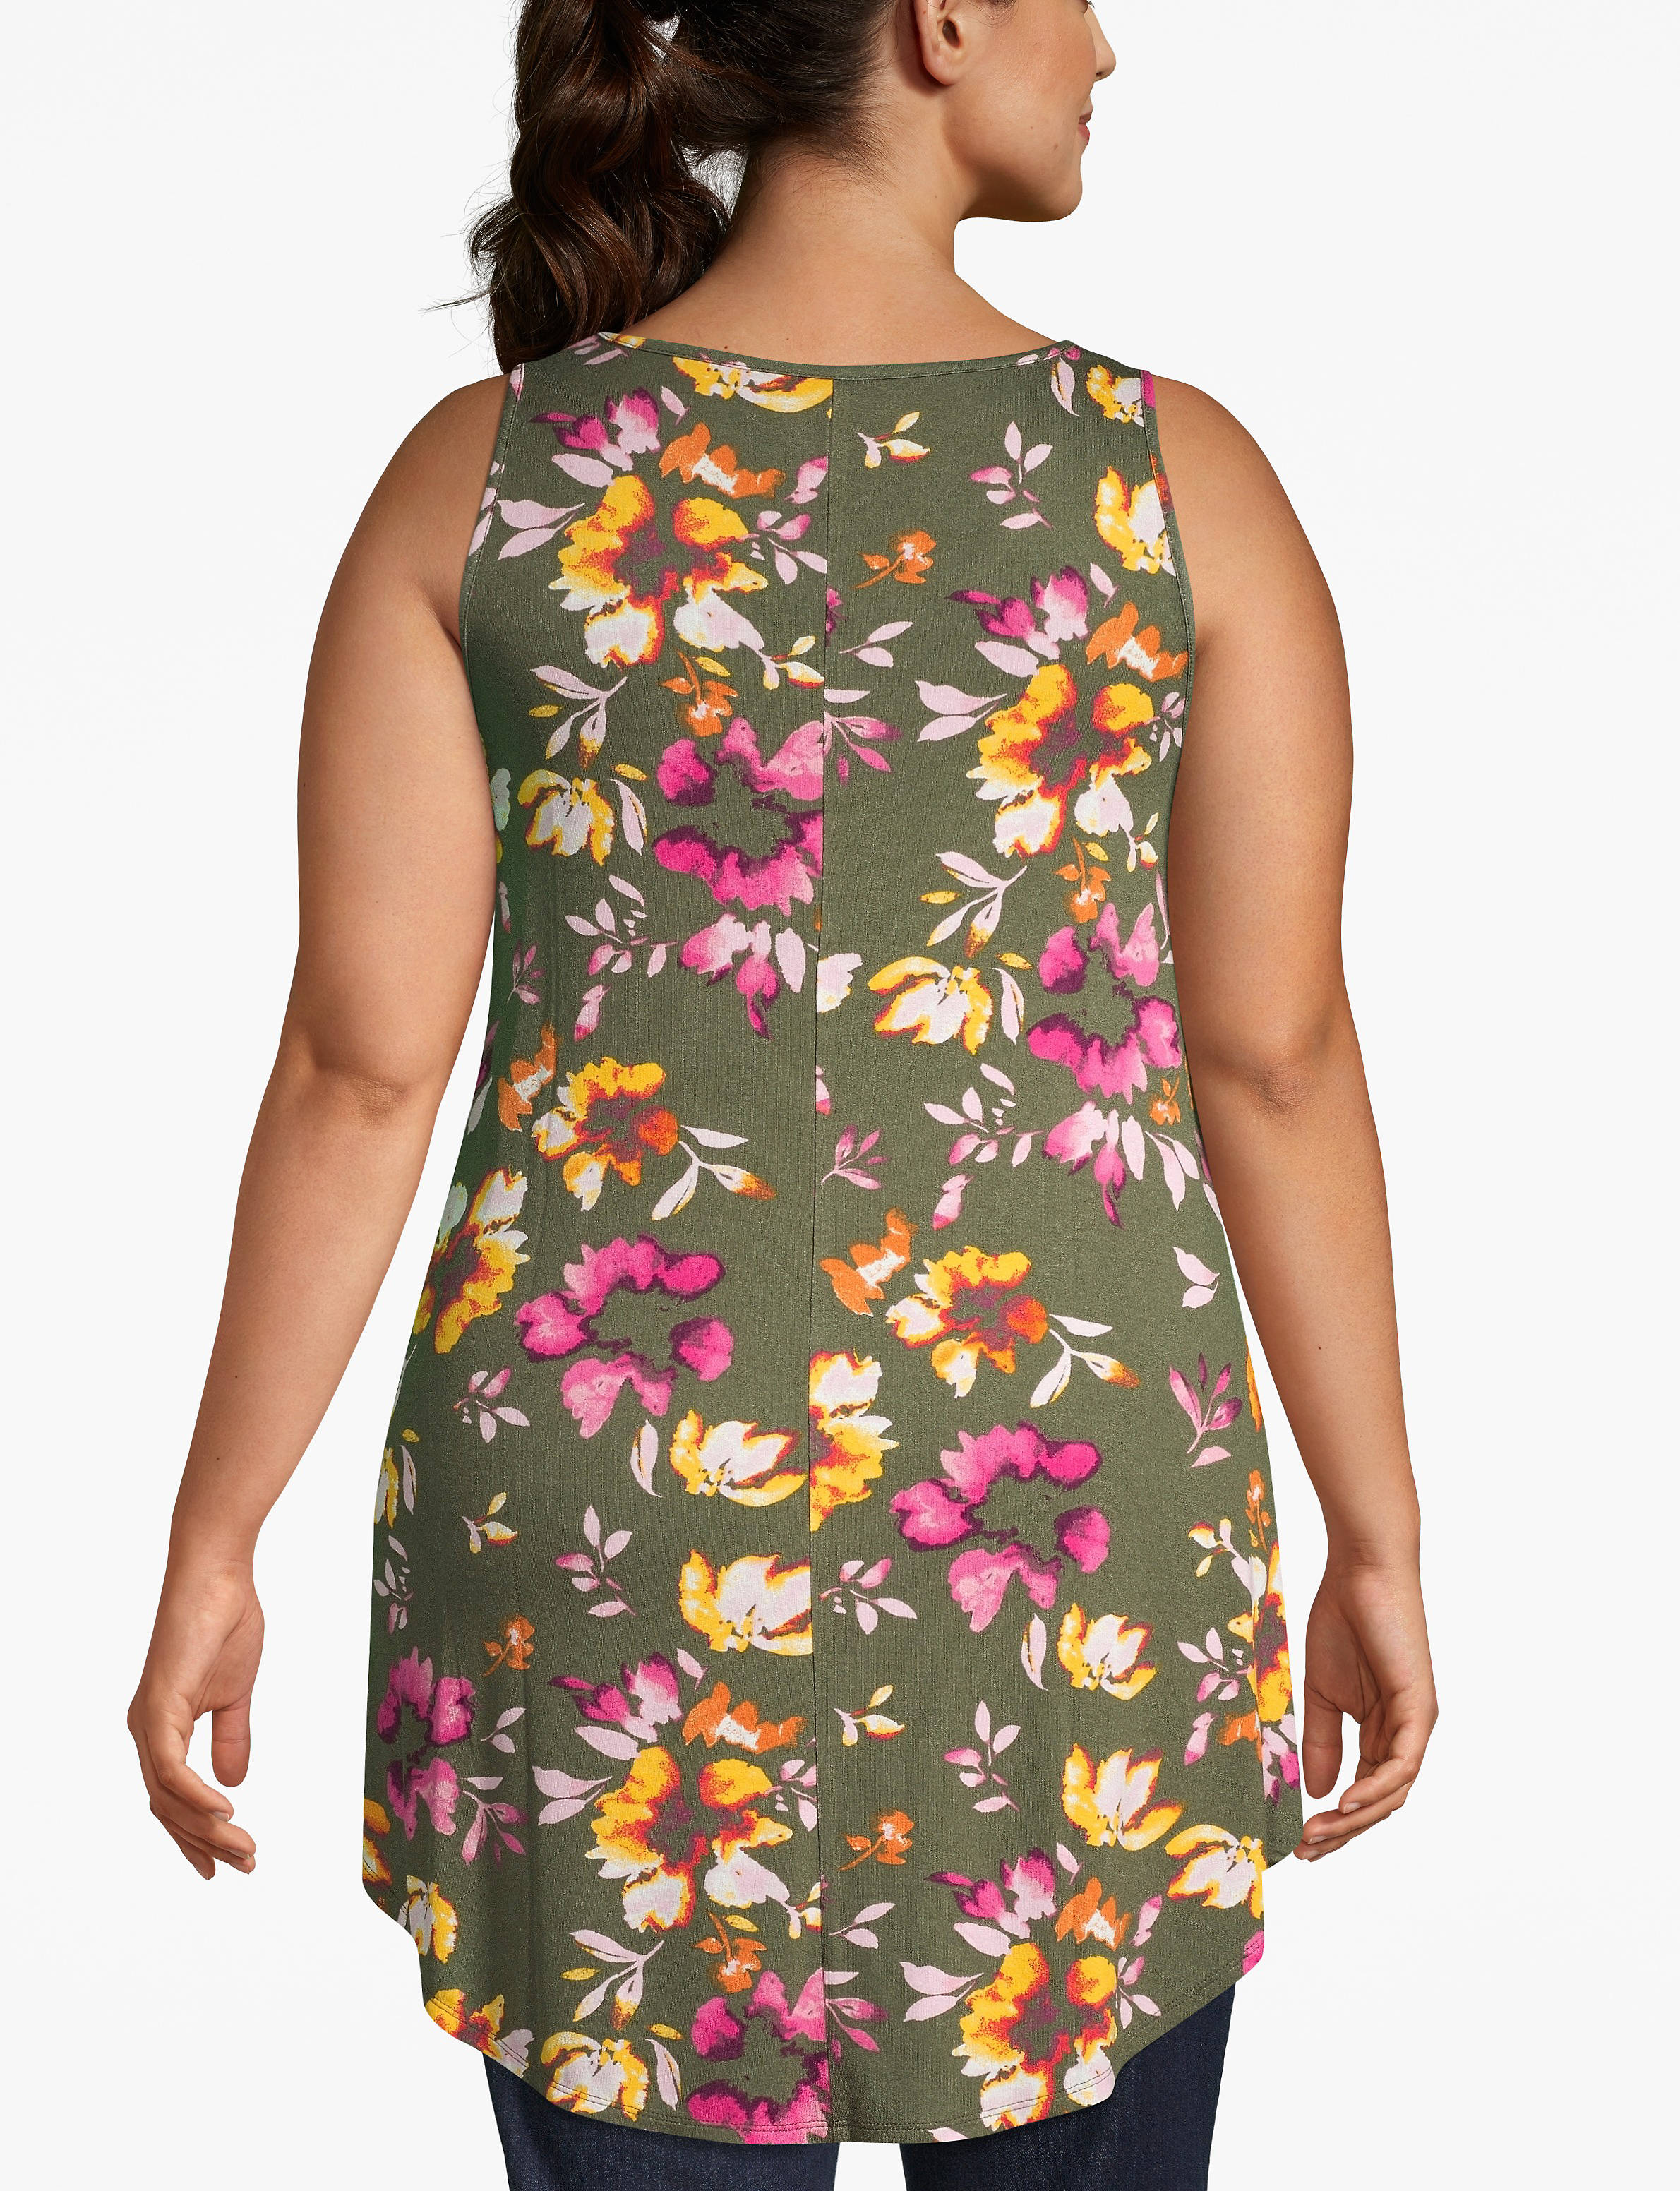 1110868 Scoop Nk Flowy Crepe Tunic Tank:LBSU20364_RomanticWatercoloredFloral_colorway10:14/16 Product Image 2